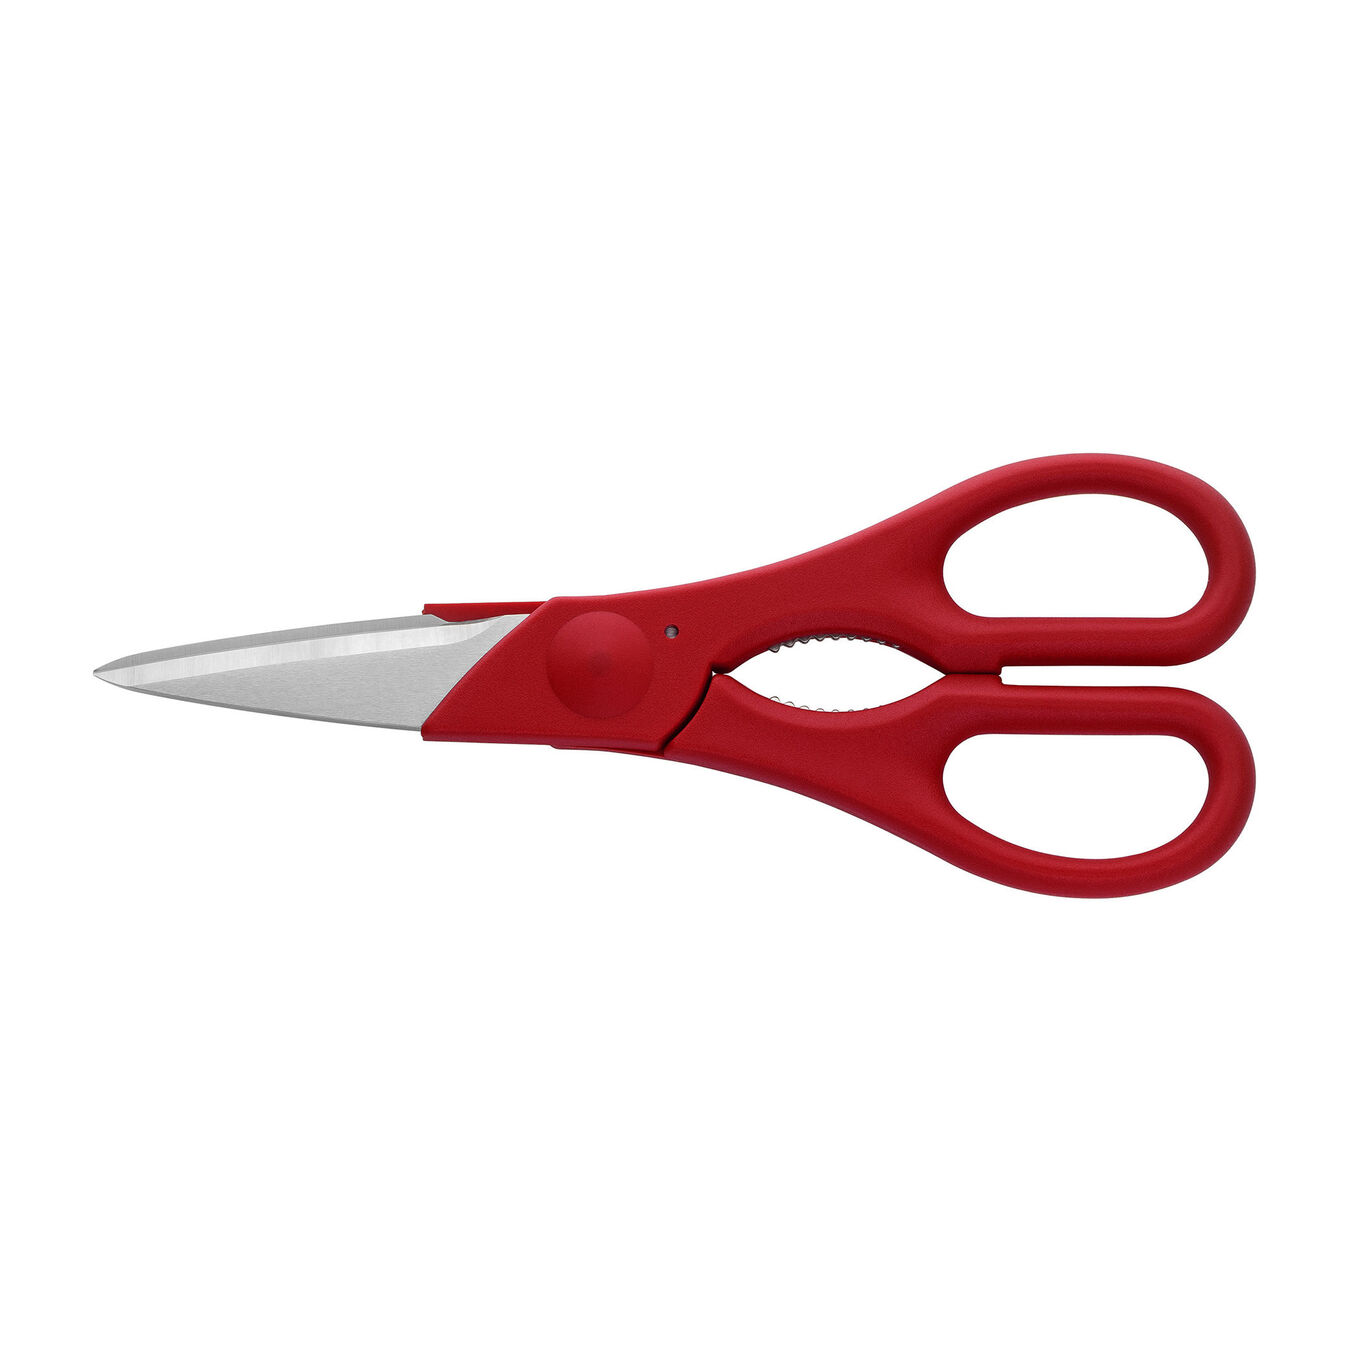 Stainless steel Multi-purpose shears red,,large 4